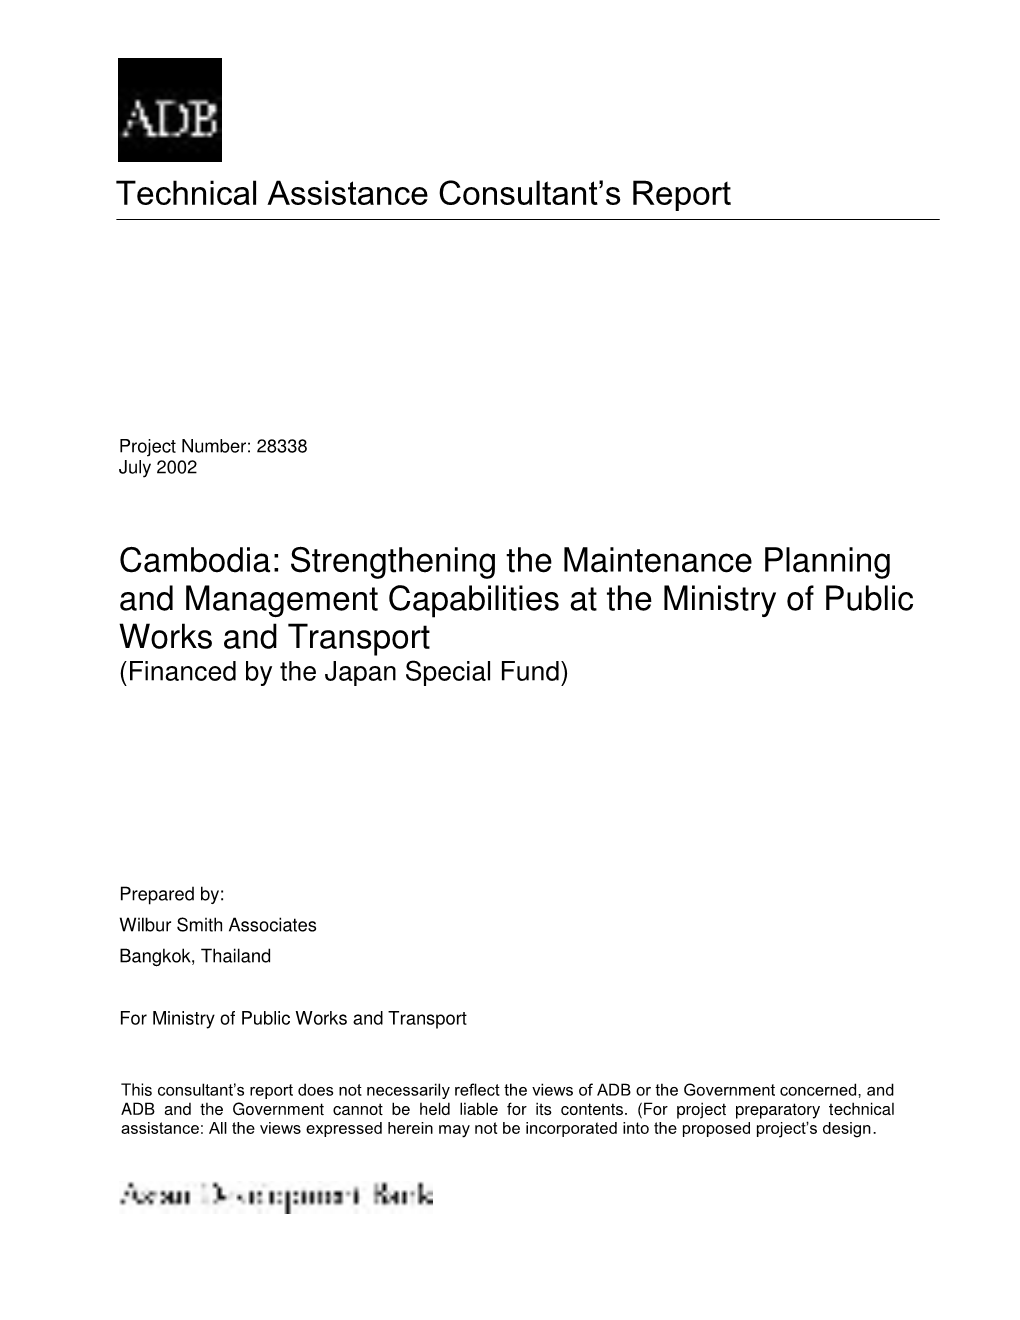 Cambodia: Strengthening the Maintenance Planning and Management Capabilities at the Ministry of Public Works and Transport (Financed by the Japan Special Fund)